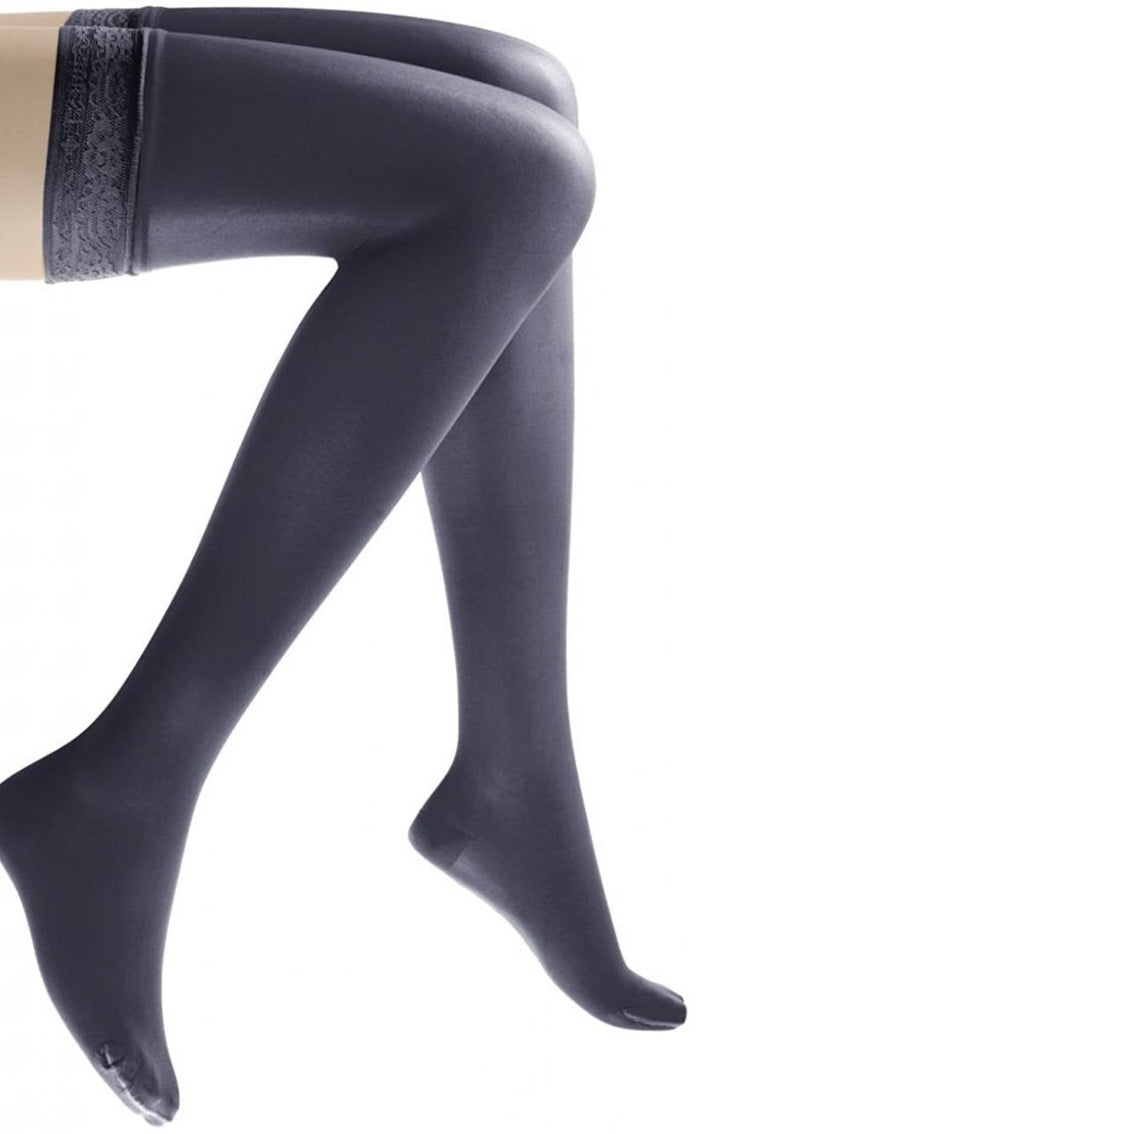 Compression Stockings and Therapy - Norfolk Pharmacy & Surgical Supplies -  Norfolk Pharmacy and Surgical